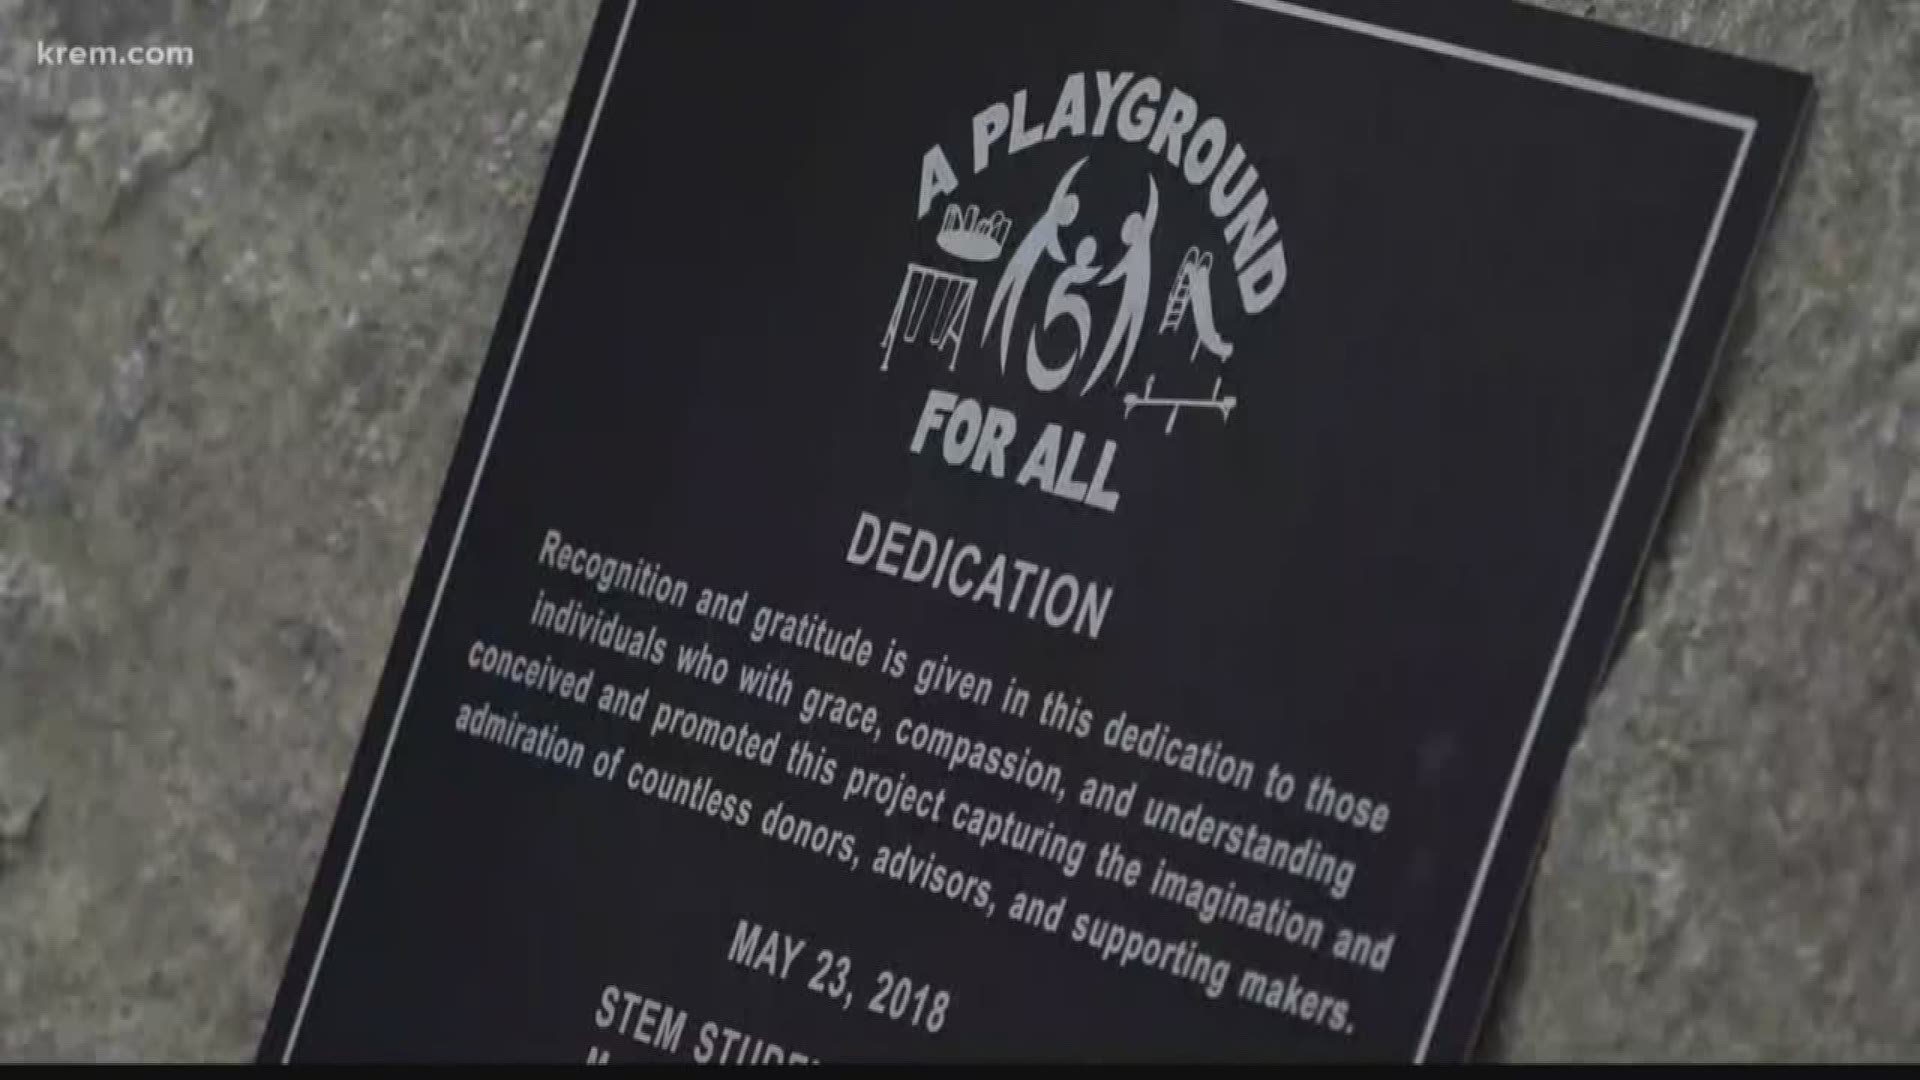 Students make playground accessible for all (5-23-18)